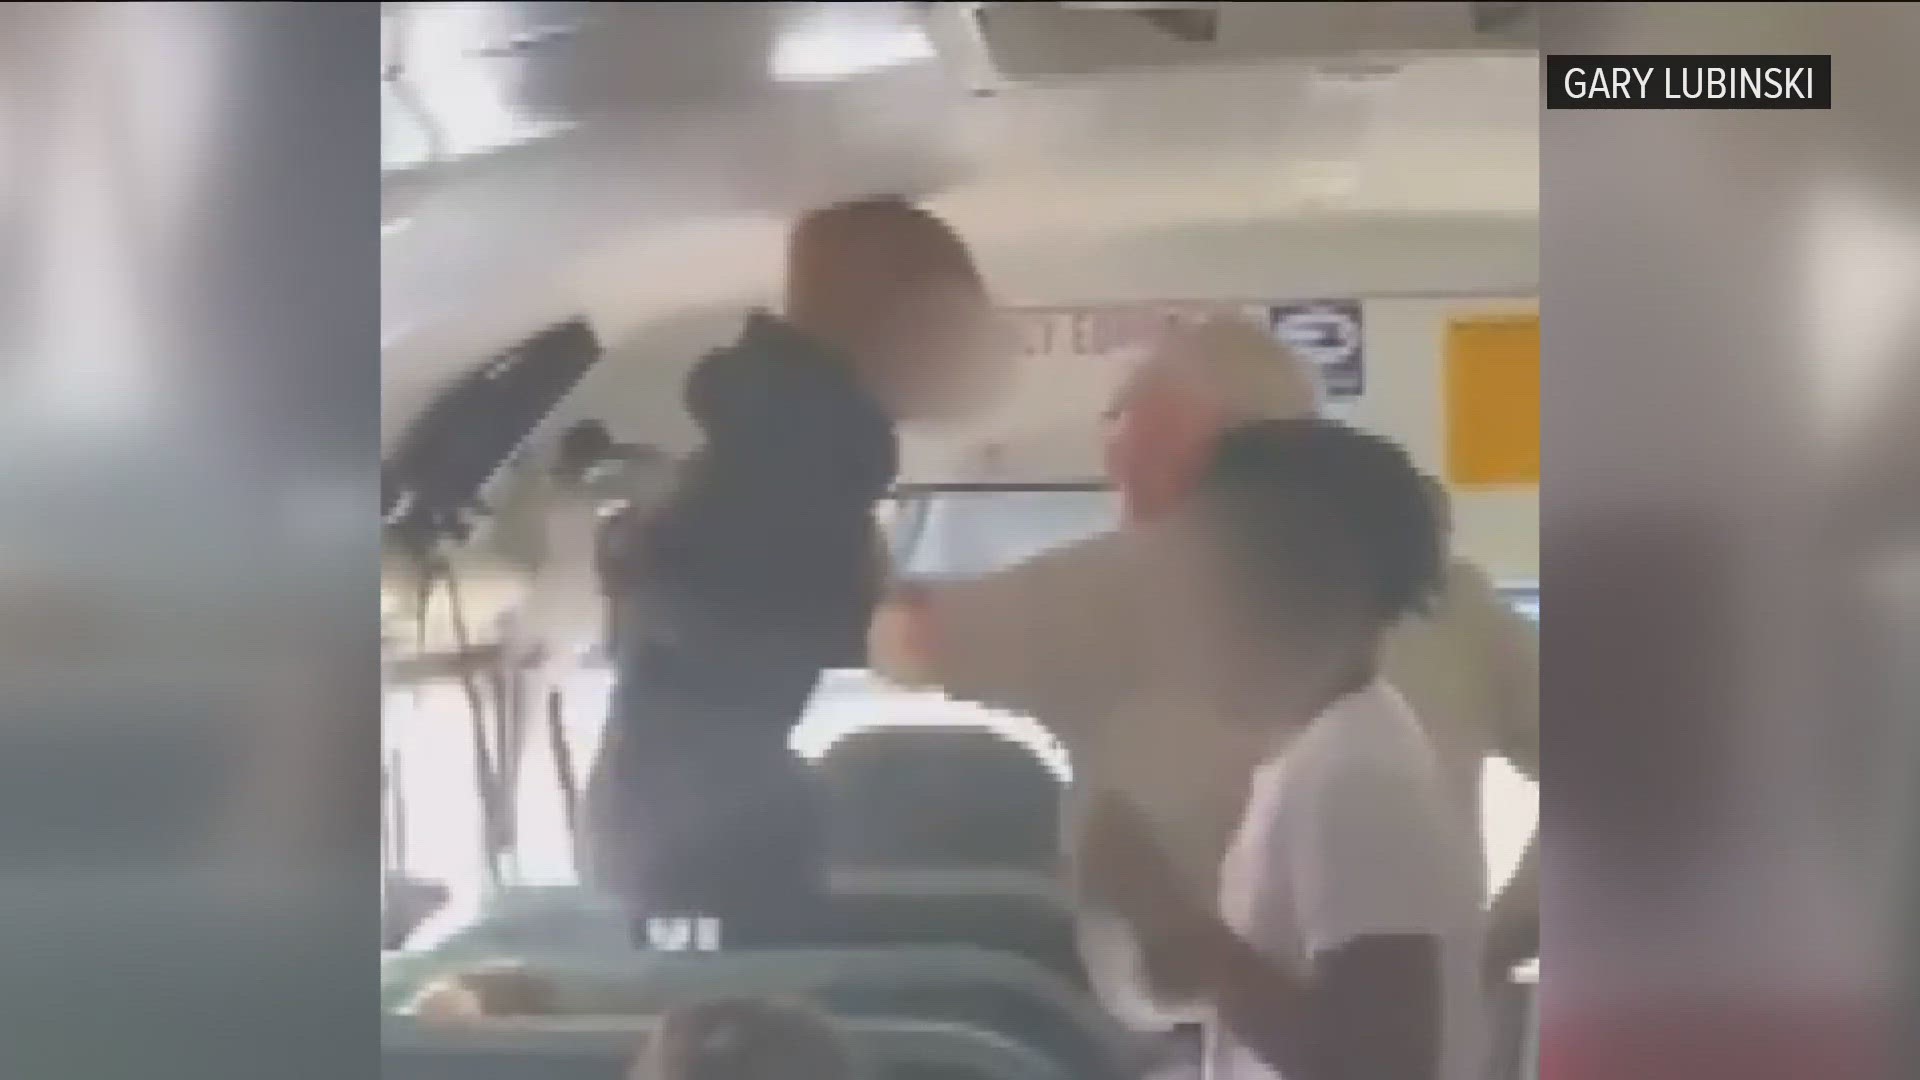 The bus driver can be seen grabbing a girl by the wrists and pulling her out of her seat in both videos as he attempts to deal with the situation.